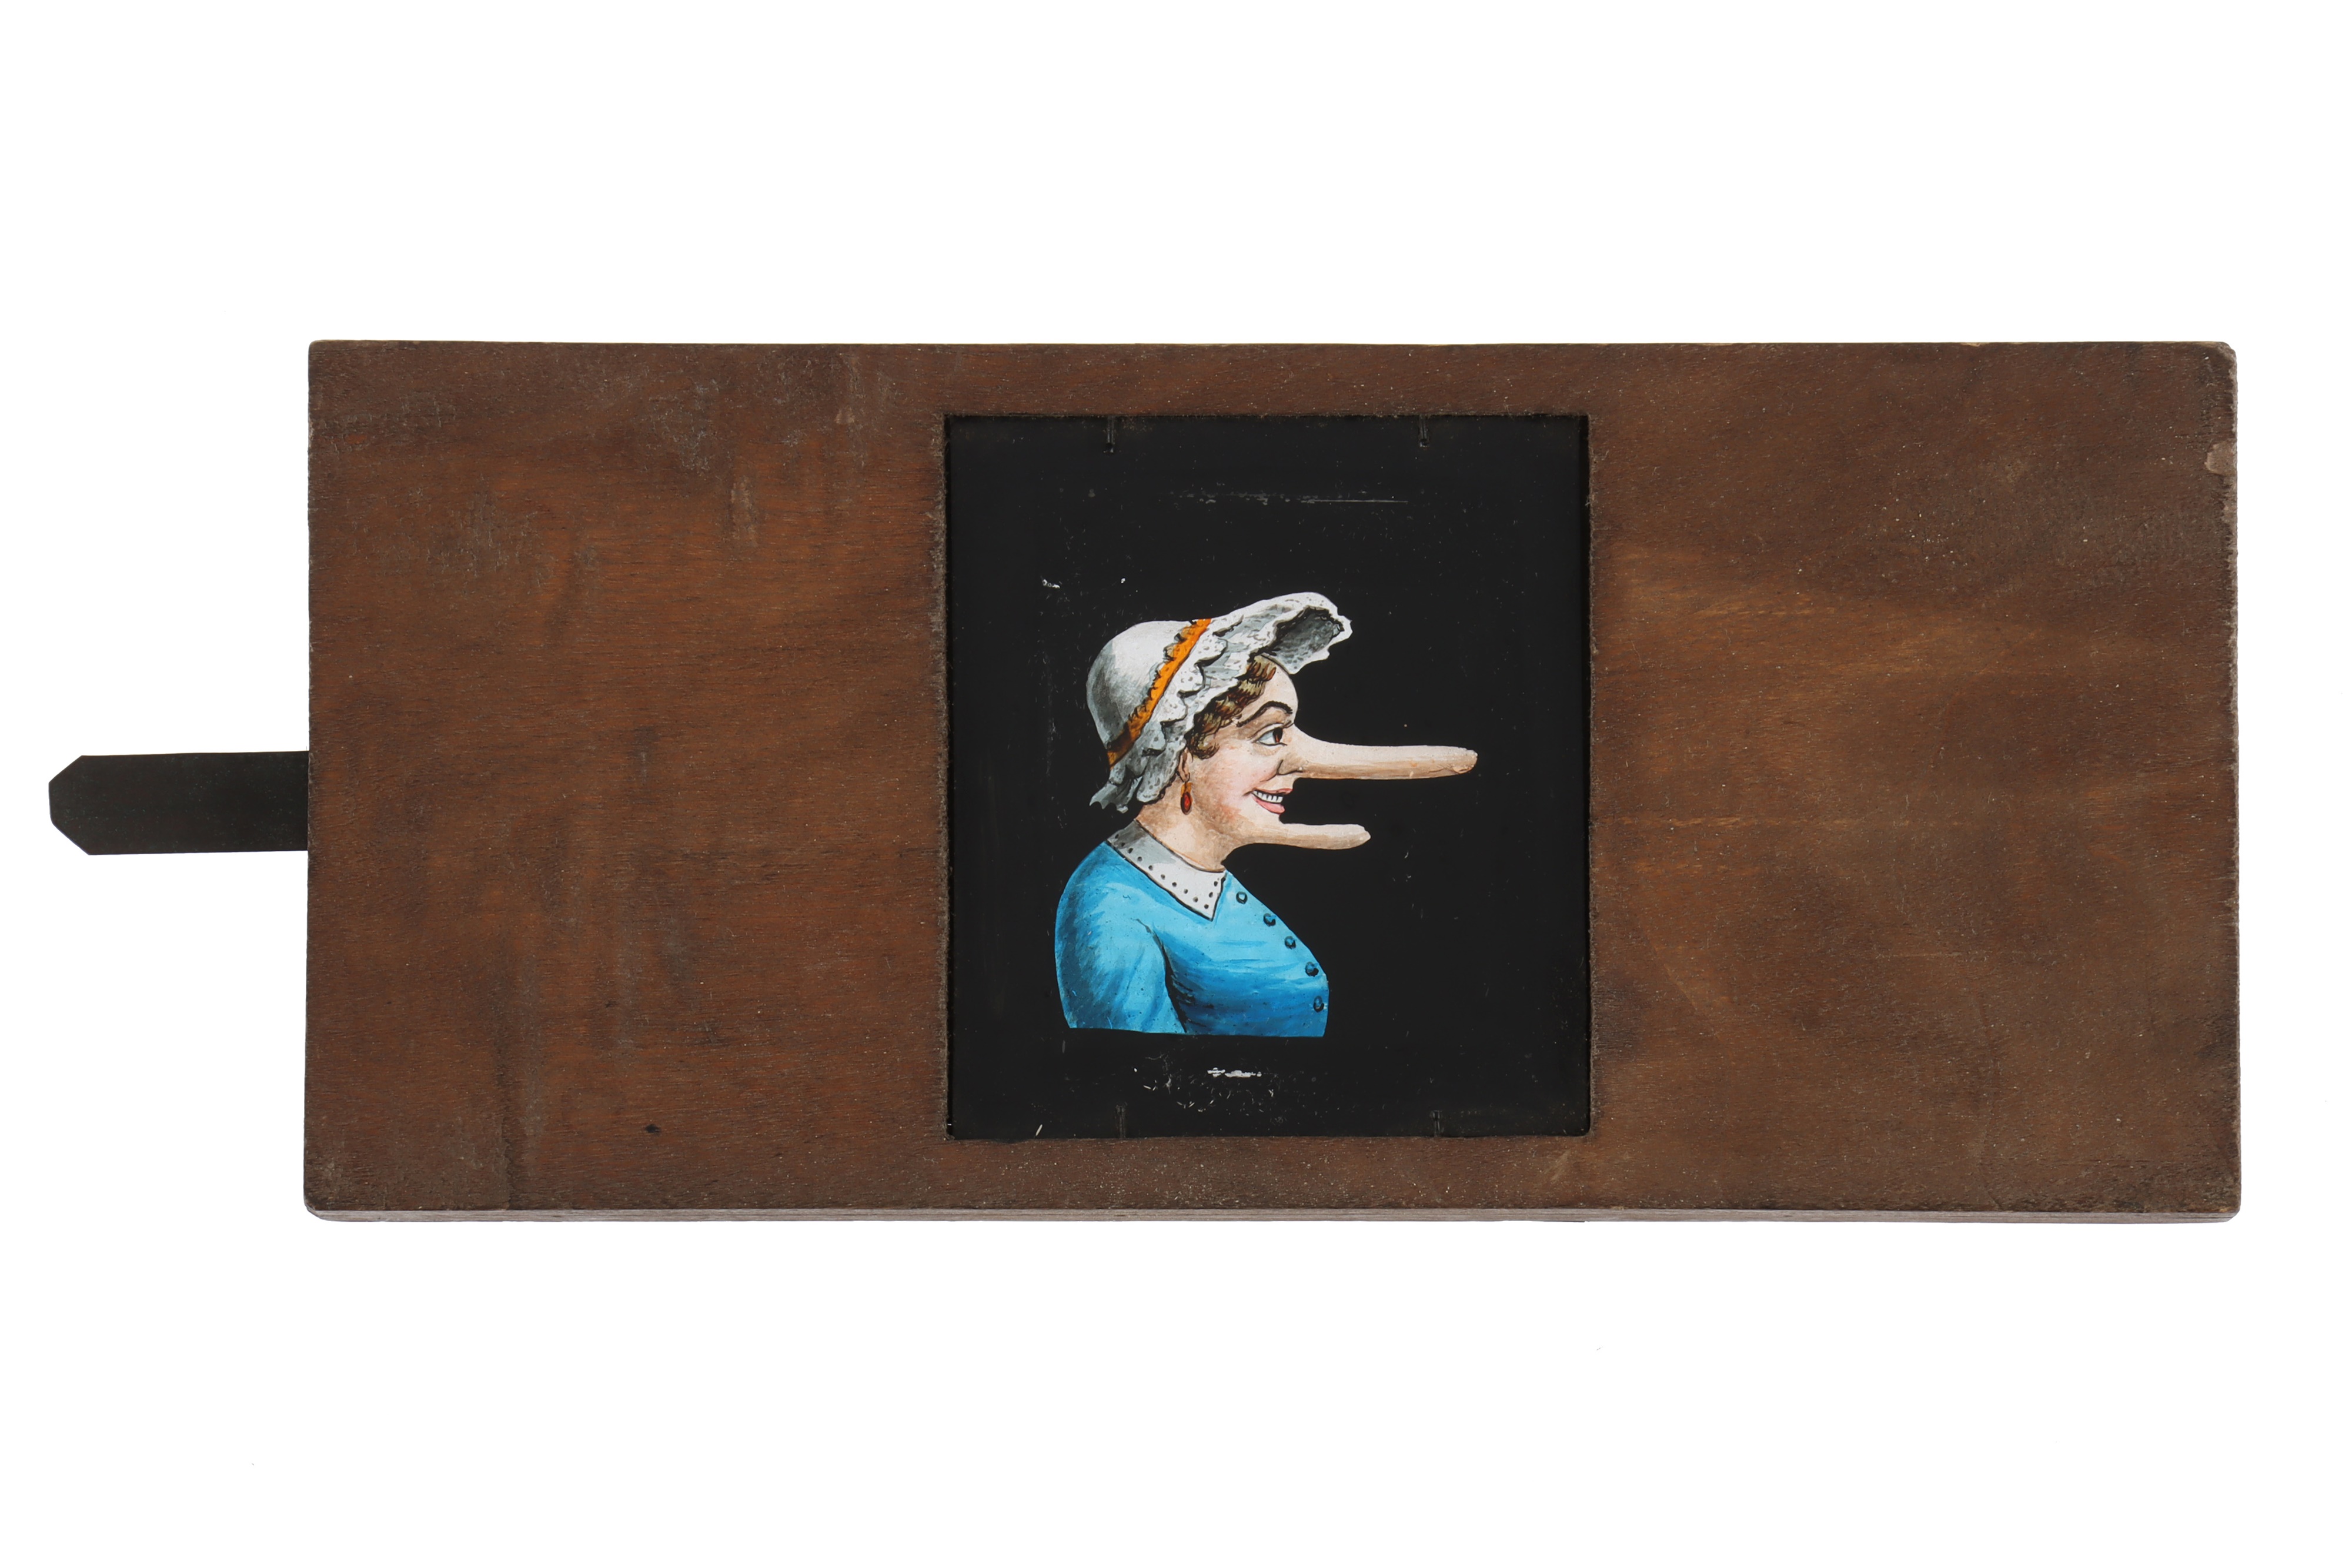 Magic Lantern Slide of a Woman with Growing Chin & Nose, - Image 3 of 3